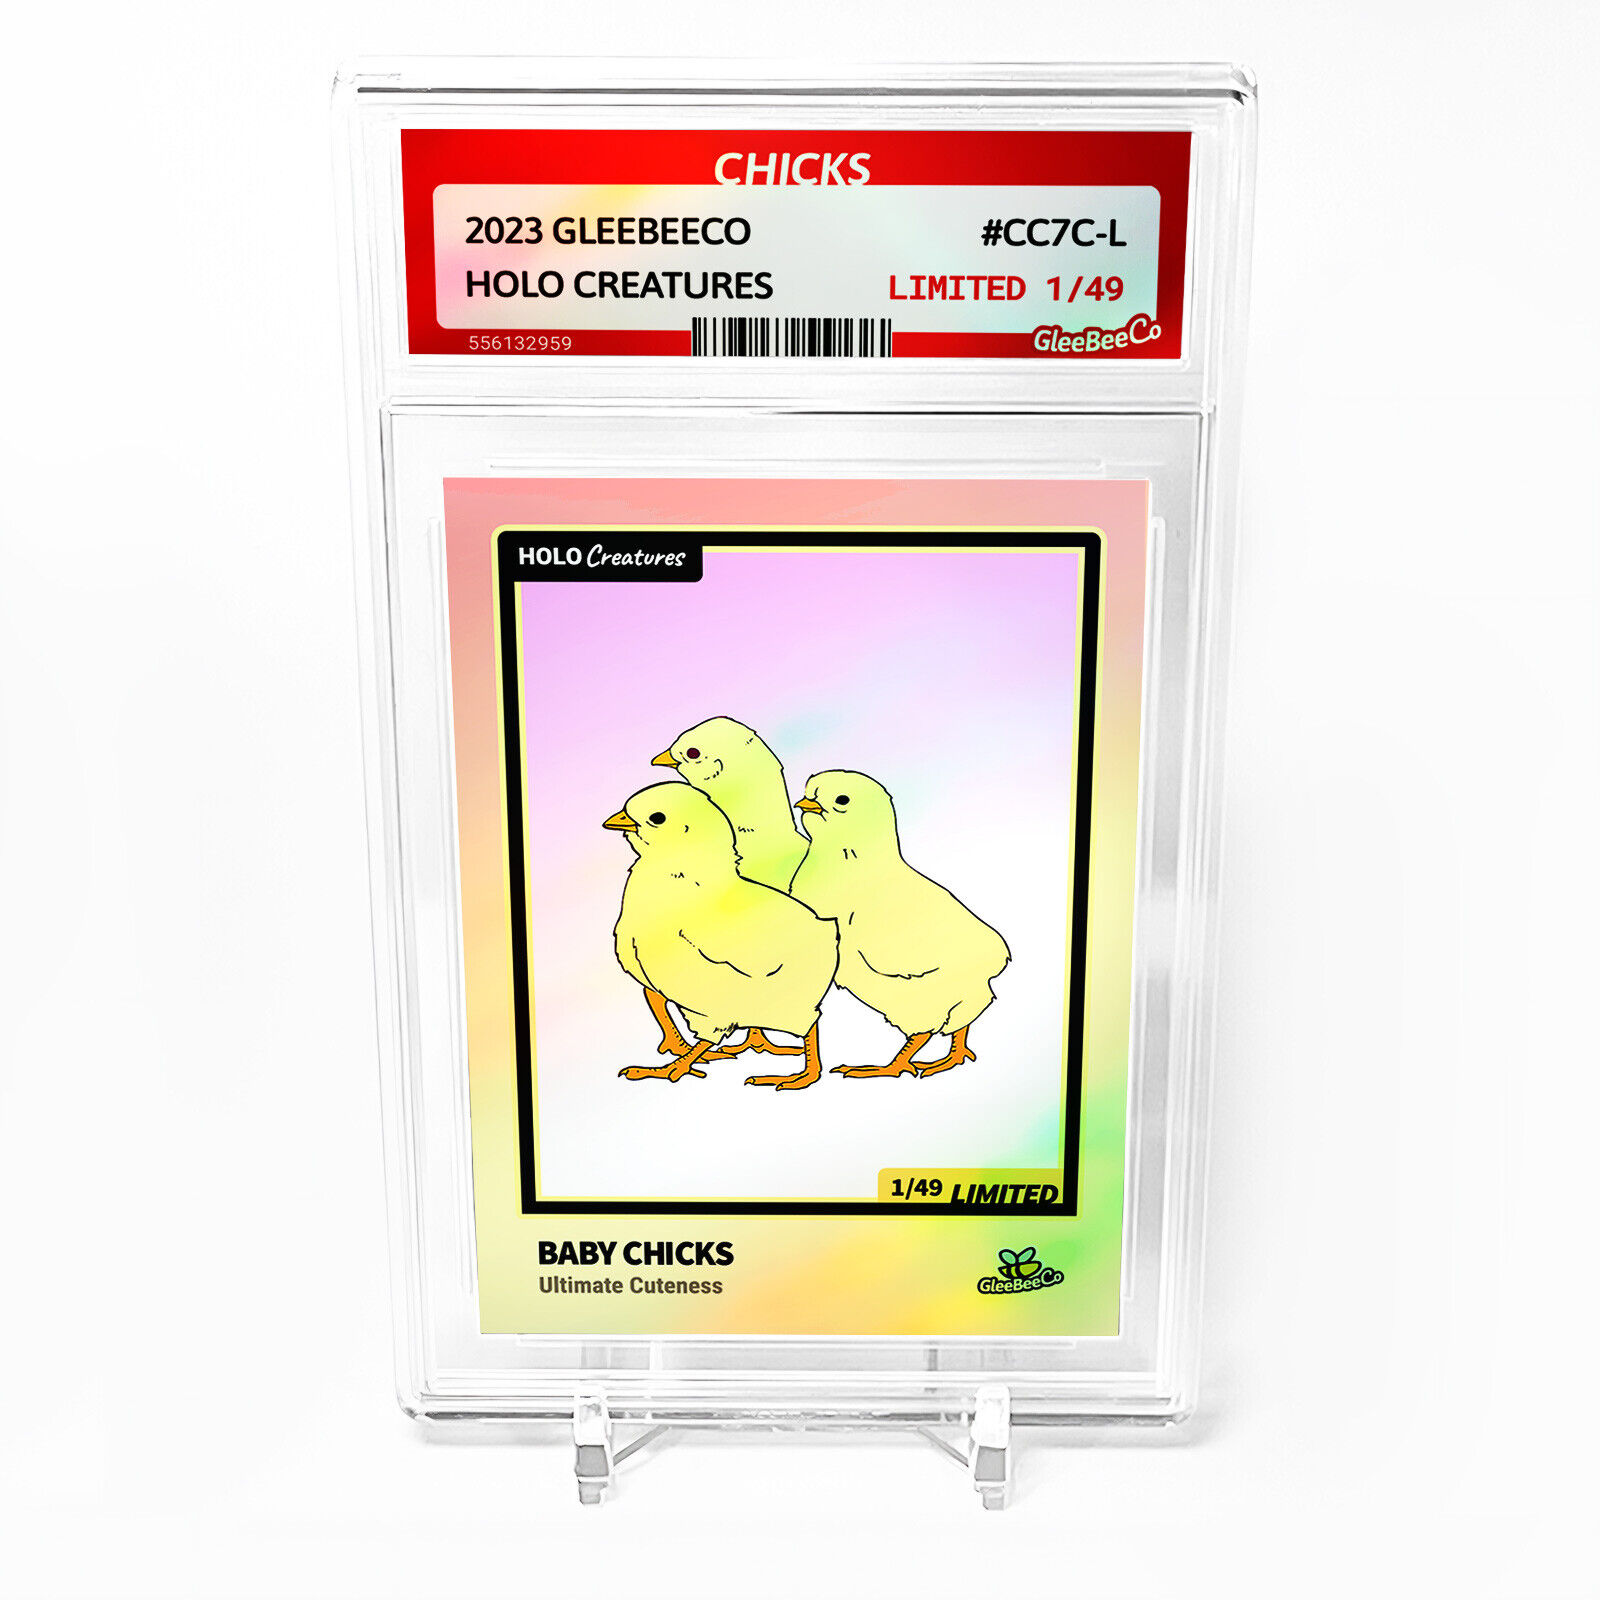 CHICKS Holographic Art Card 2023 GleeBeeCo Slabbed Cartoon #CC7C-L Only /49